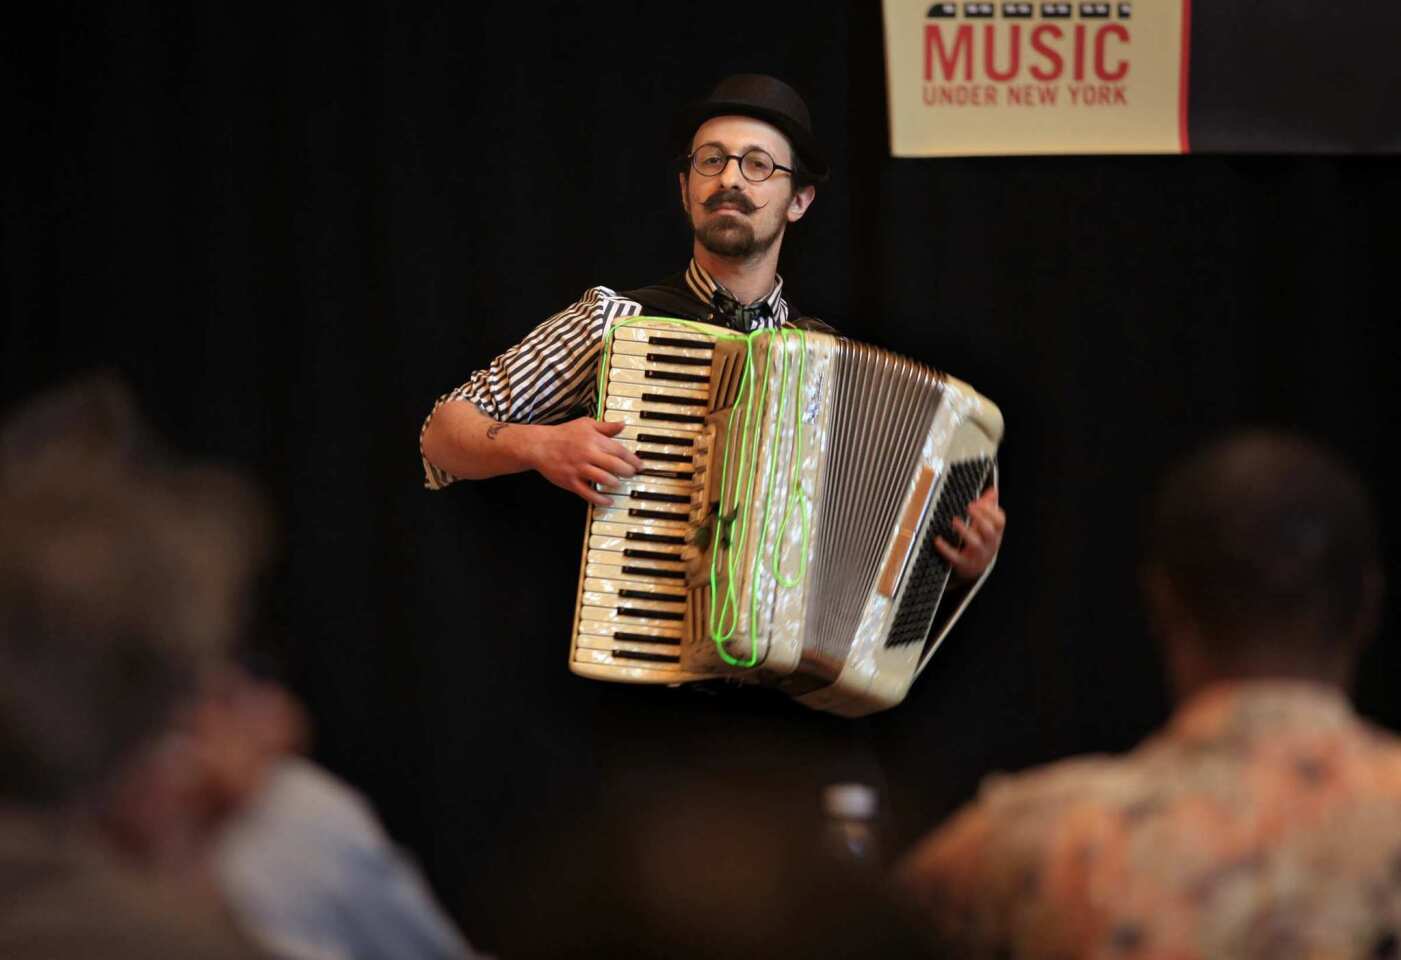 Accordion player Matt Dallow, 32, auditions in front of a panel of judges for Music Under New York in Grand Central Station. MUNY holds yearly auditions to determine who will get official positions to play music in the New York subways.